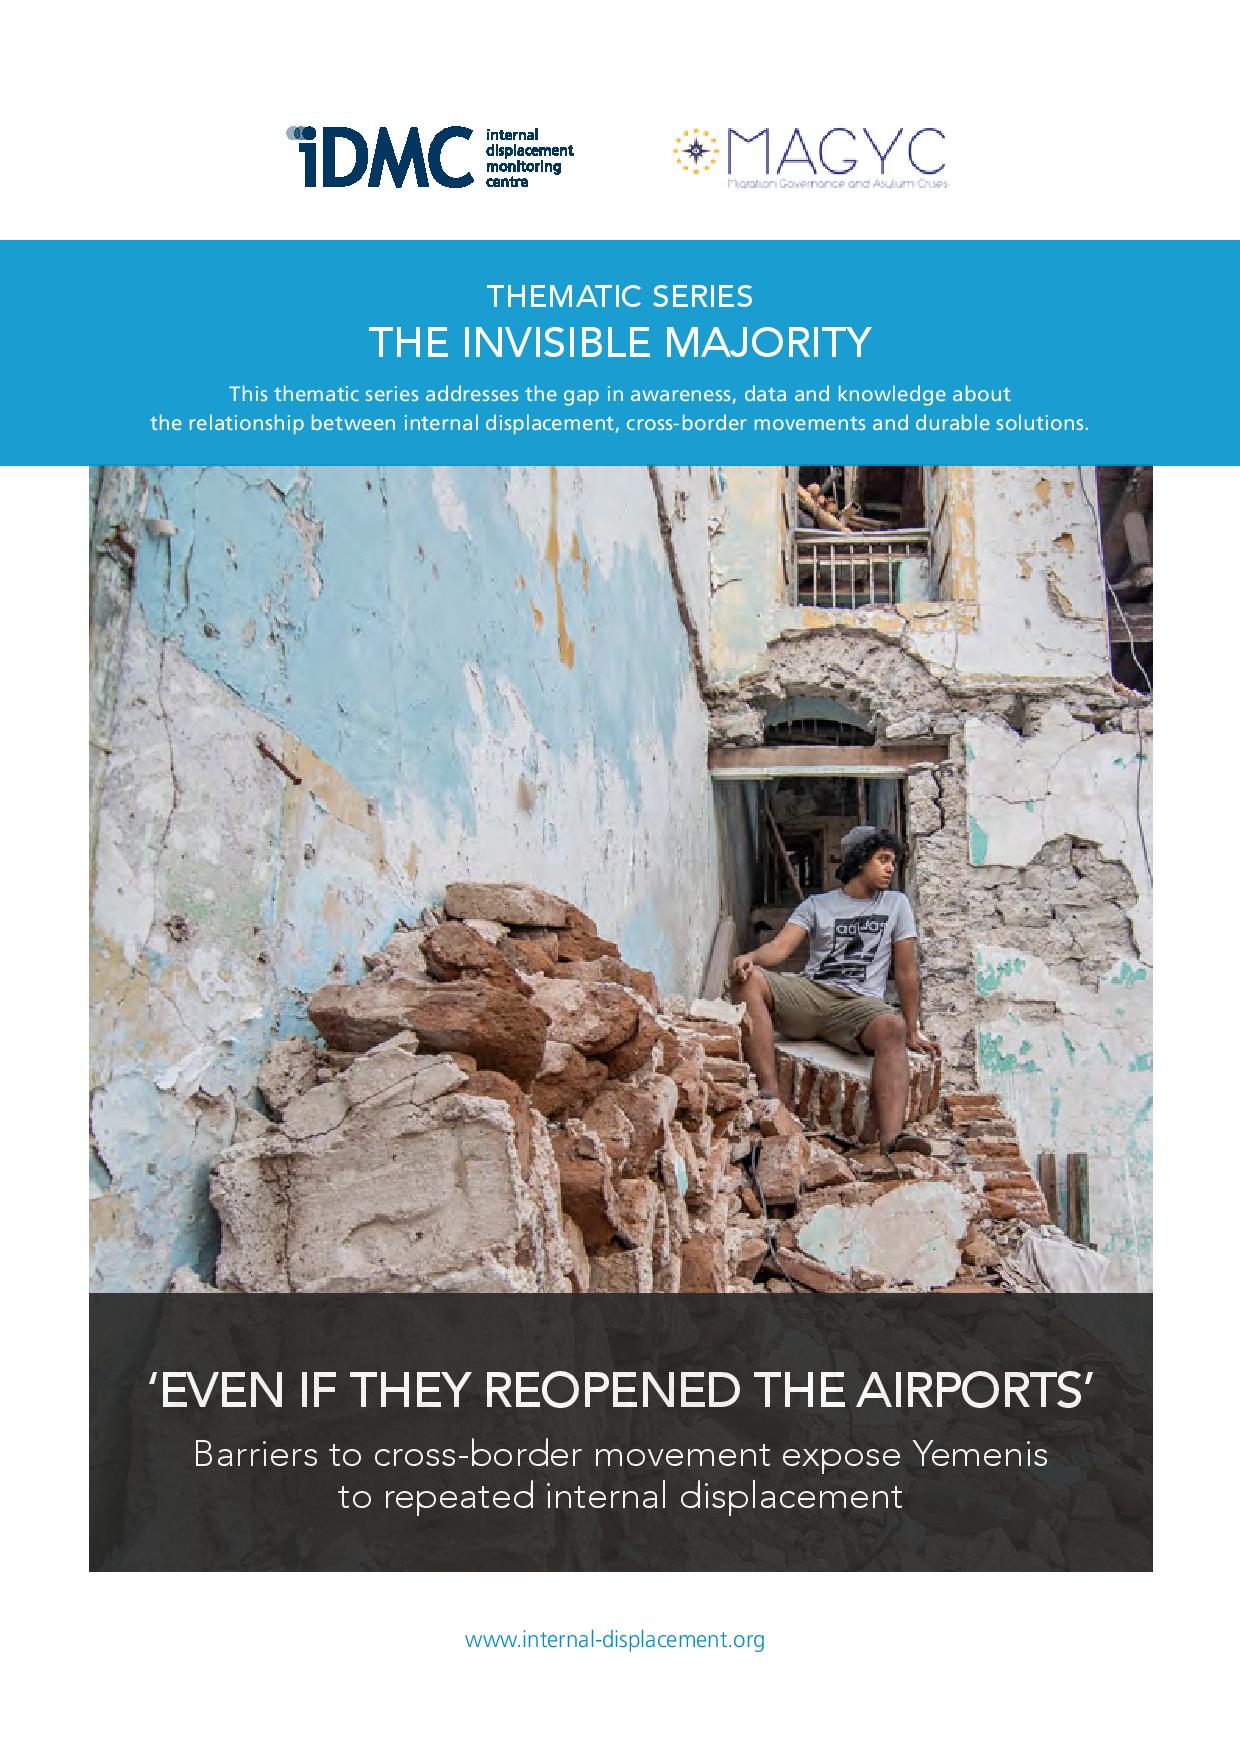 Even if they reopened the airports: Barriers to cross-border movement expose Yemenis to repeated internal displacement